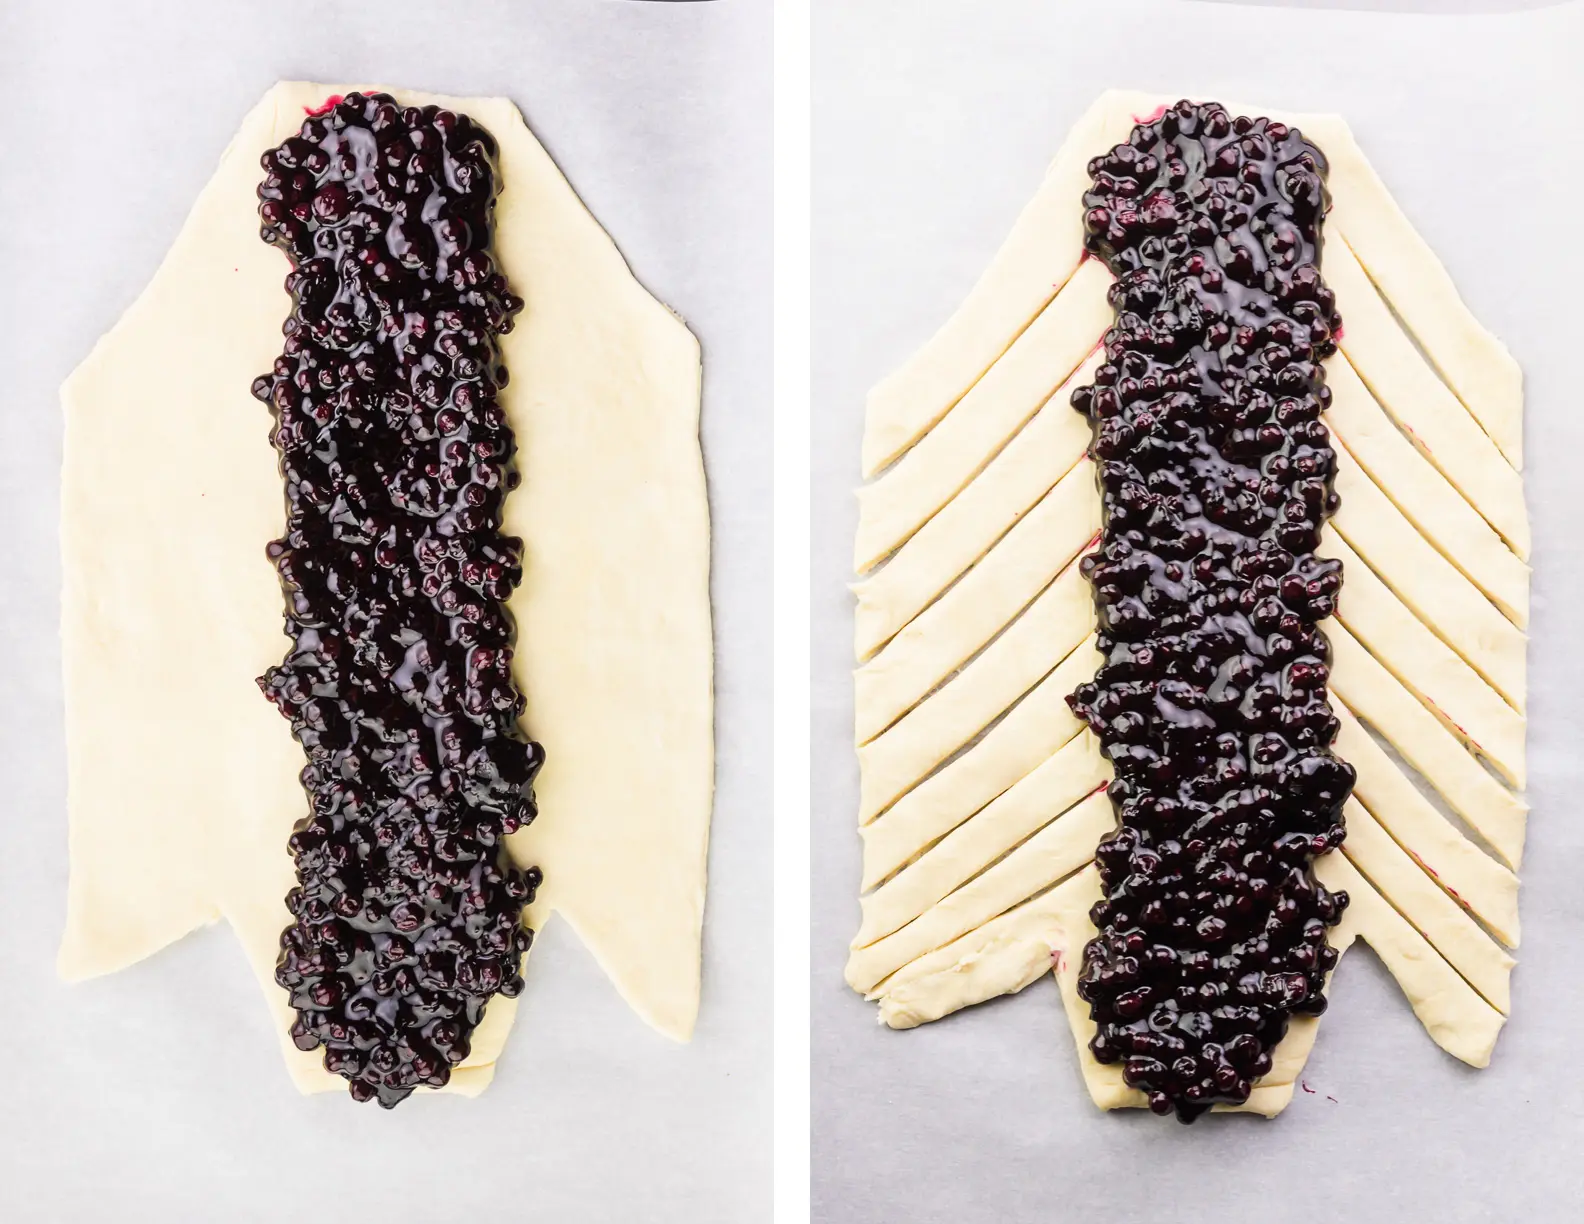 A collage of two images shows the dough cut with a thin strip of blueberry filling down the center on the left. The image on the right shows the same dough and filling, except thin strips have been cut out of the dough.